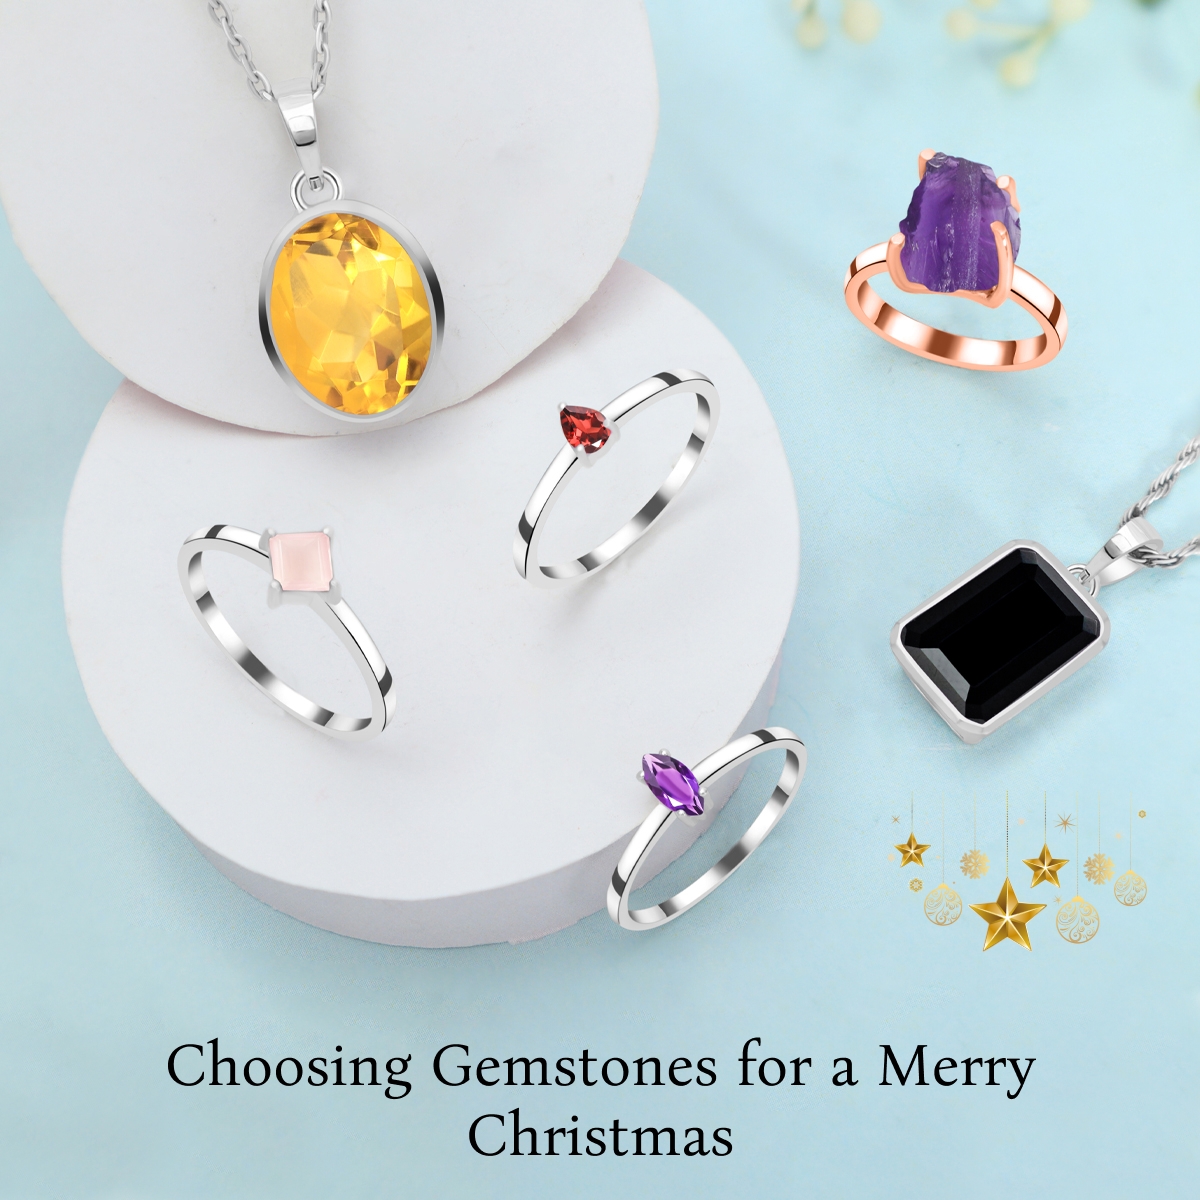 Which Gemstones would be the best for his Christmas